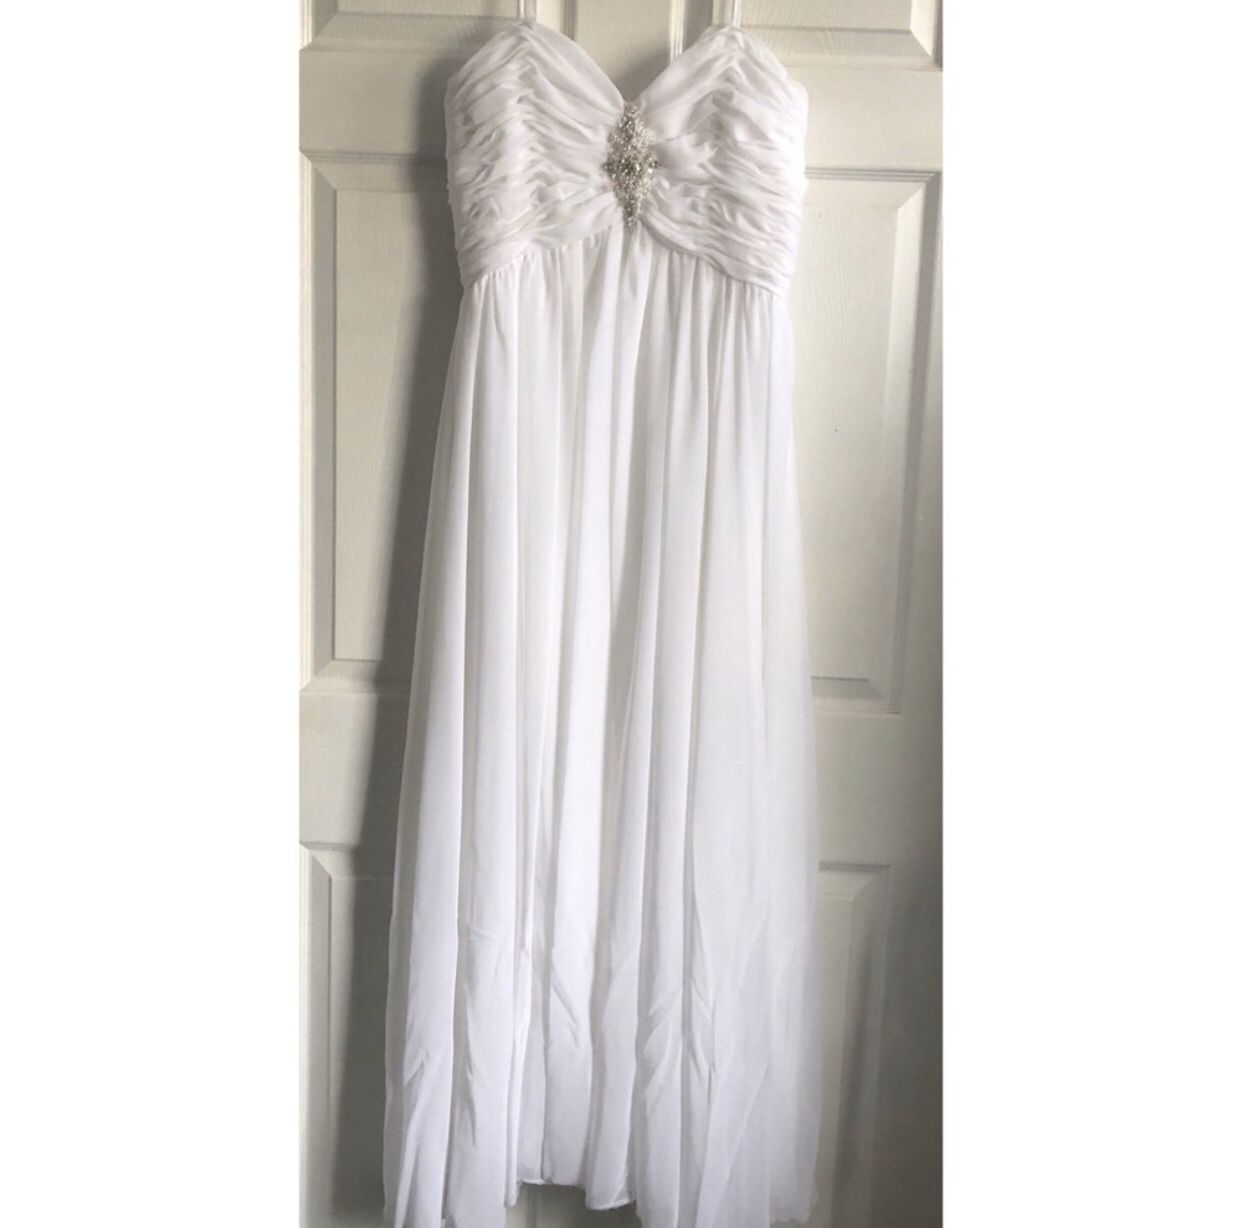 White Long Gown Prom Wedding Party Dress Size 10